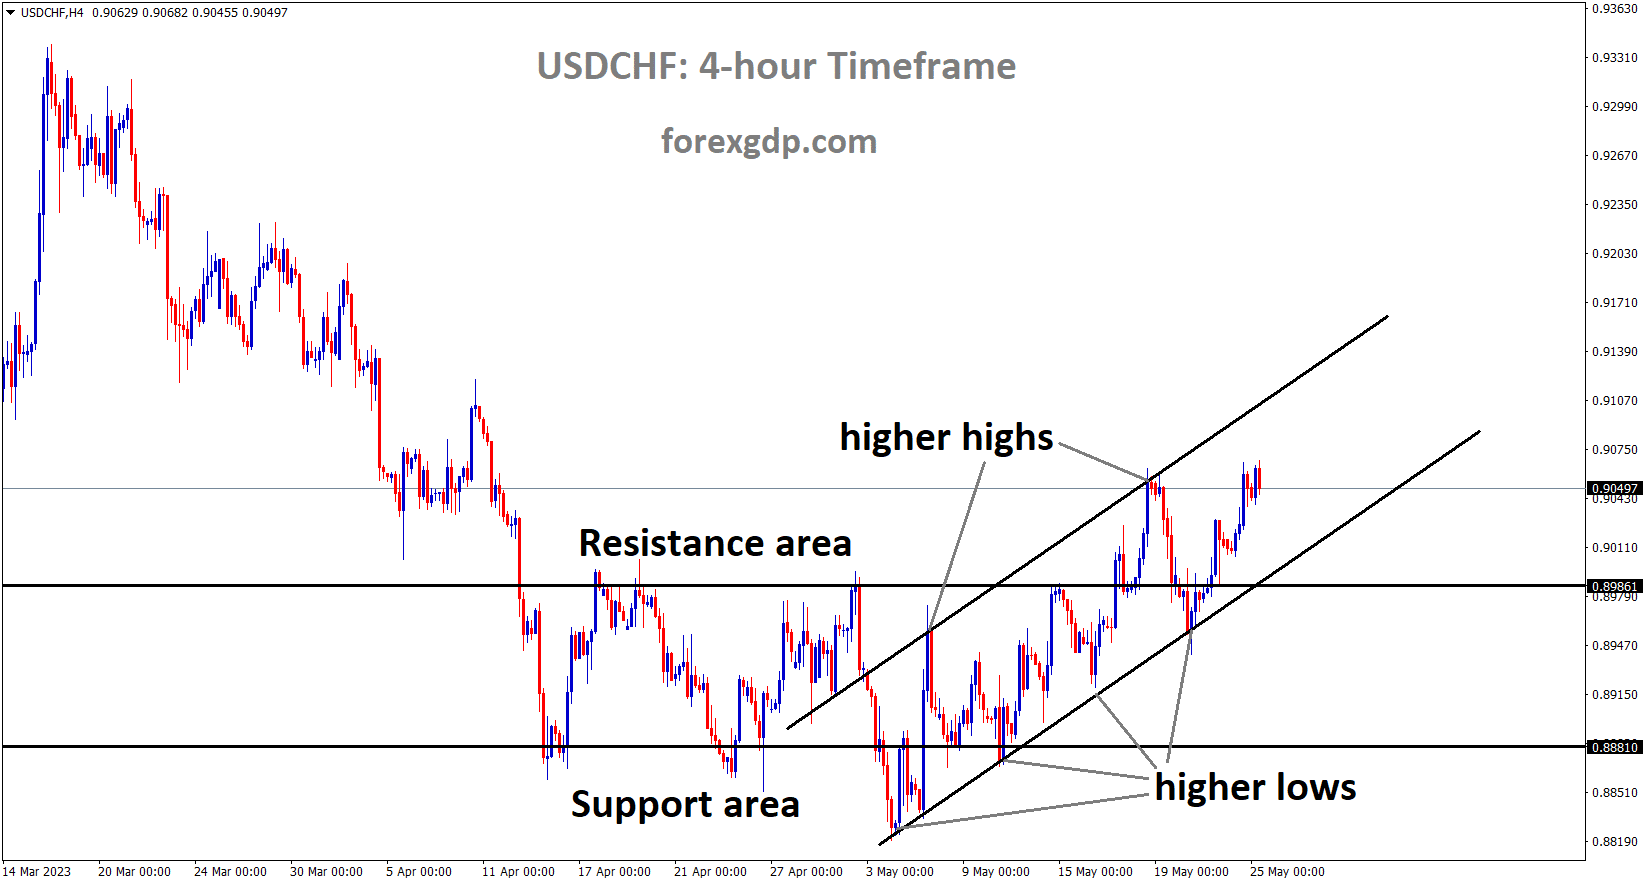 USDCHF is moving in an Ascending channel and the market has rebounded from the higher low area of the channel and the Box pattern breakout in upside.